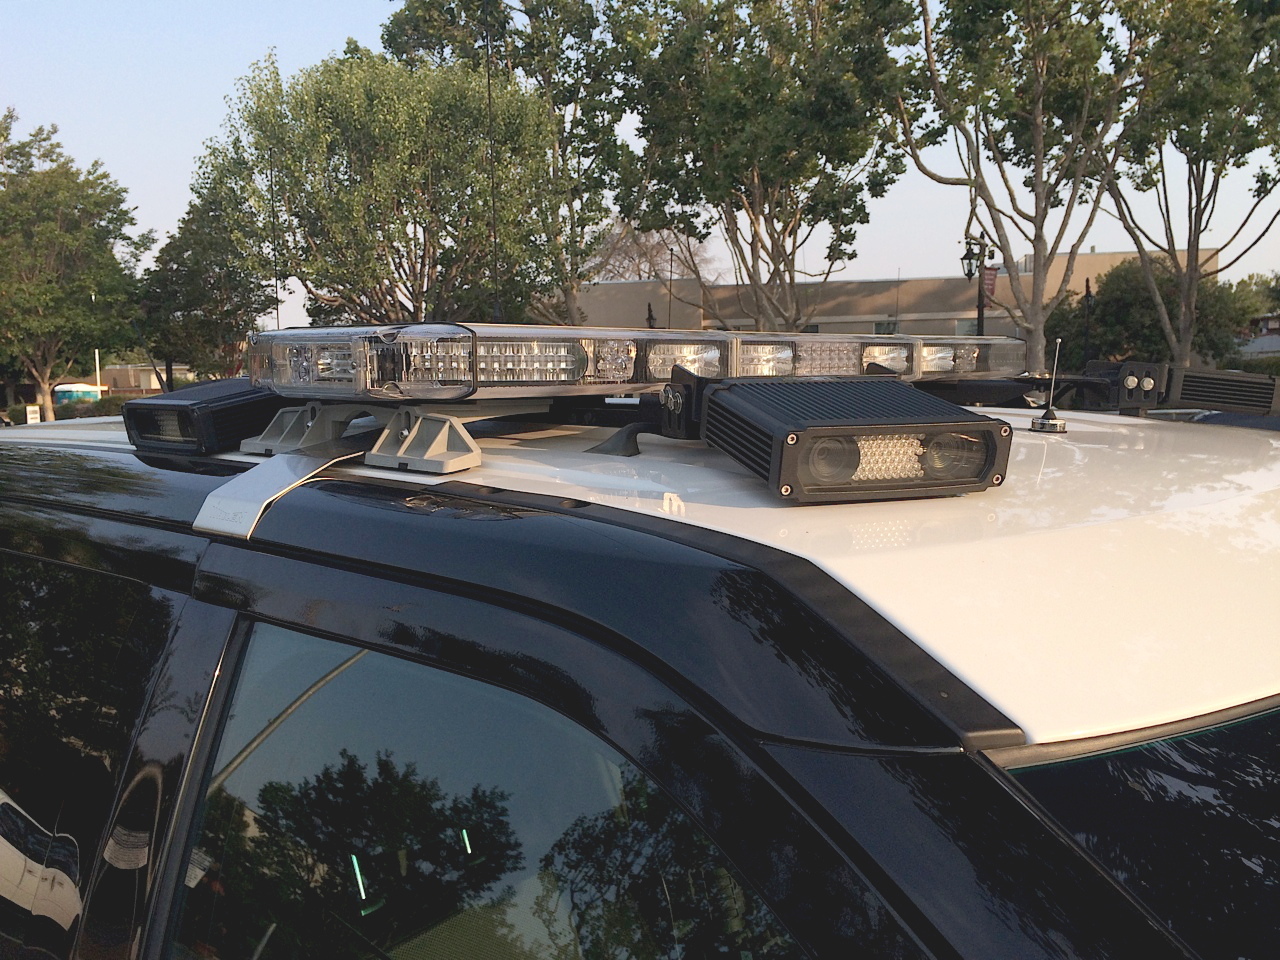 Top of police car with APLR scanner